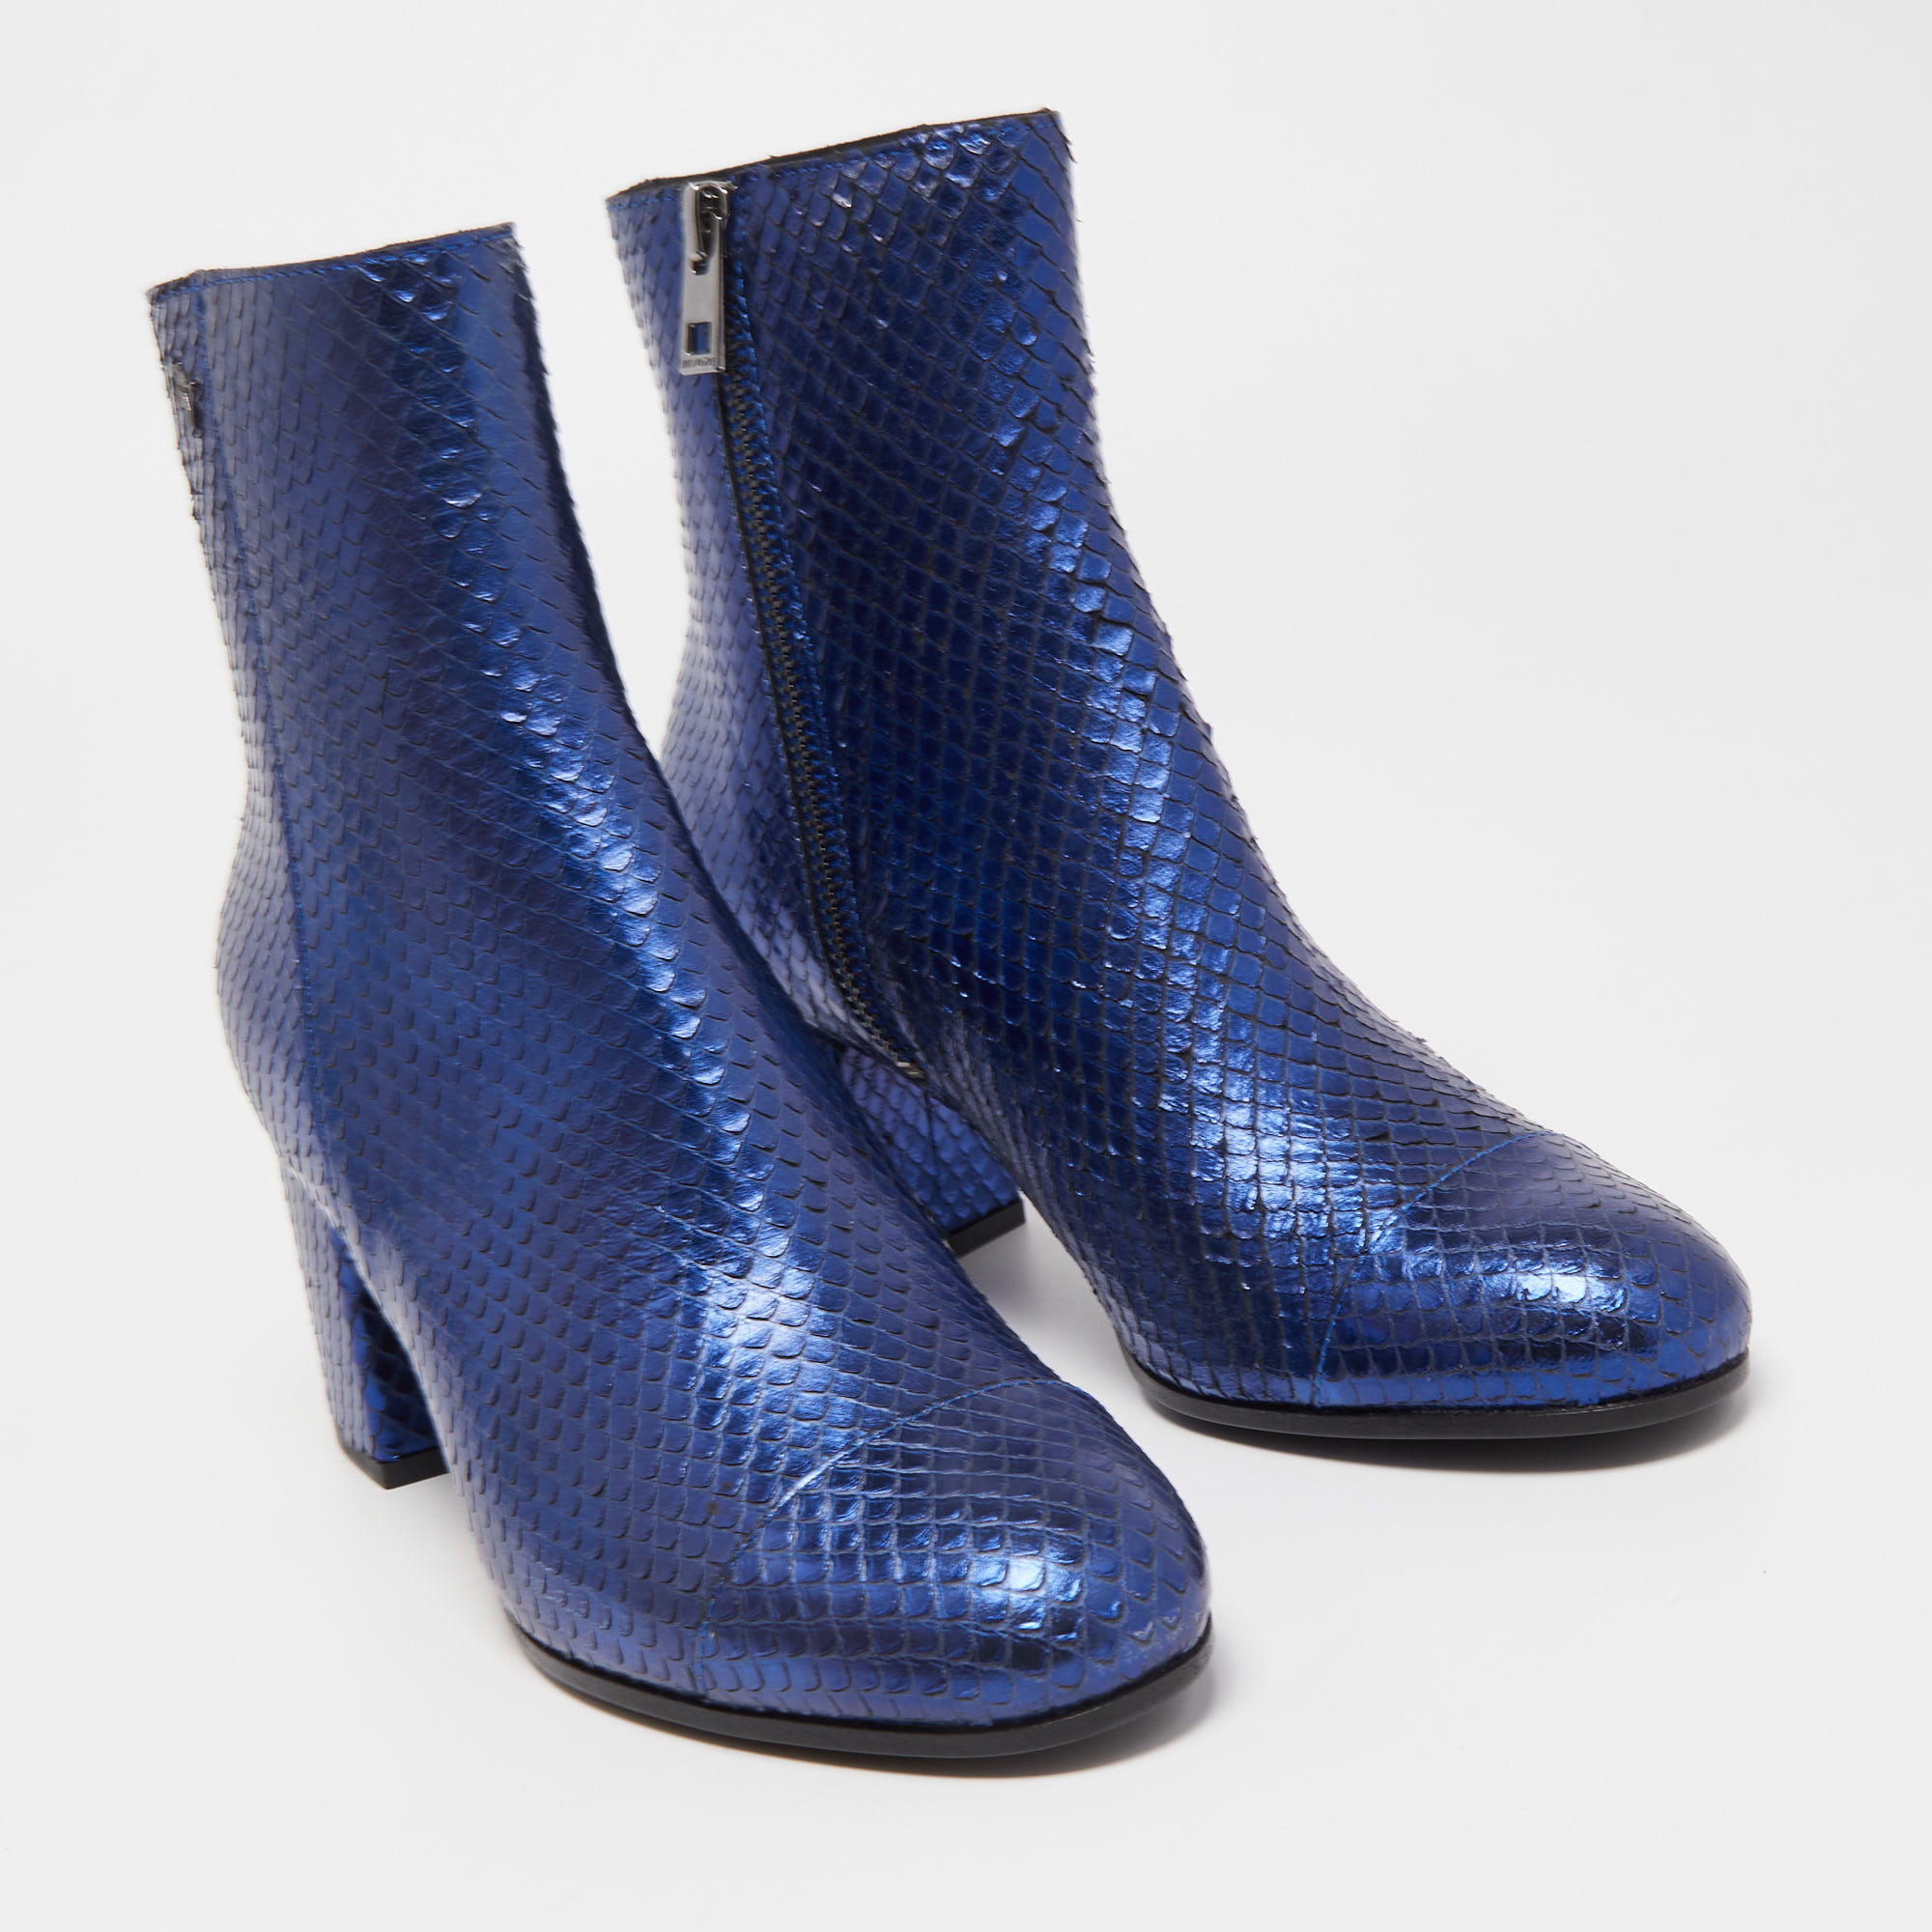 Zadiq & Voltaire Blue Python Embossed Leather Block Heel Ankle Booties Size 36